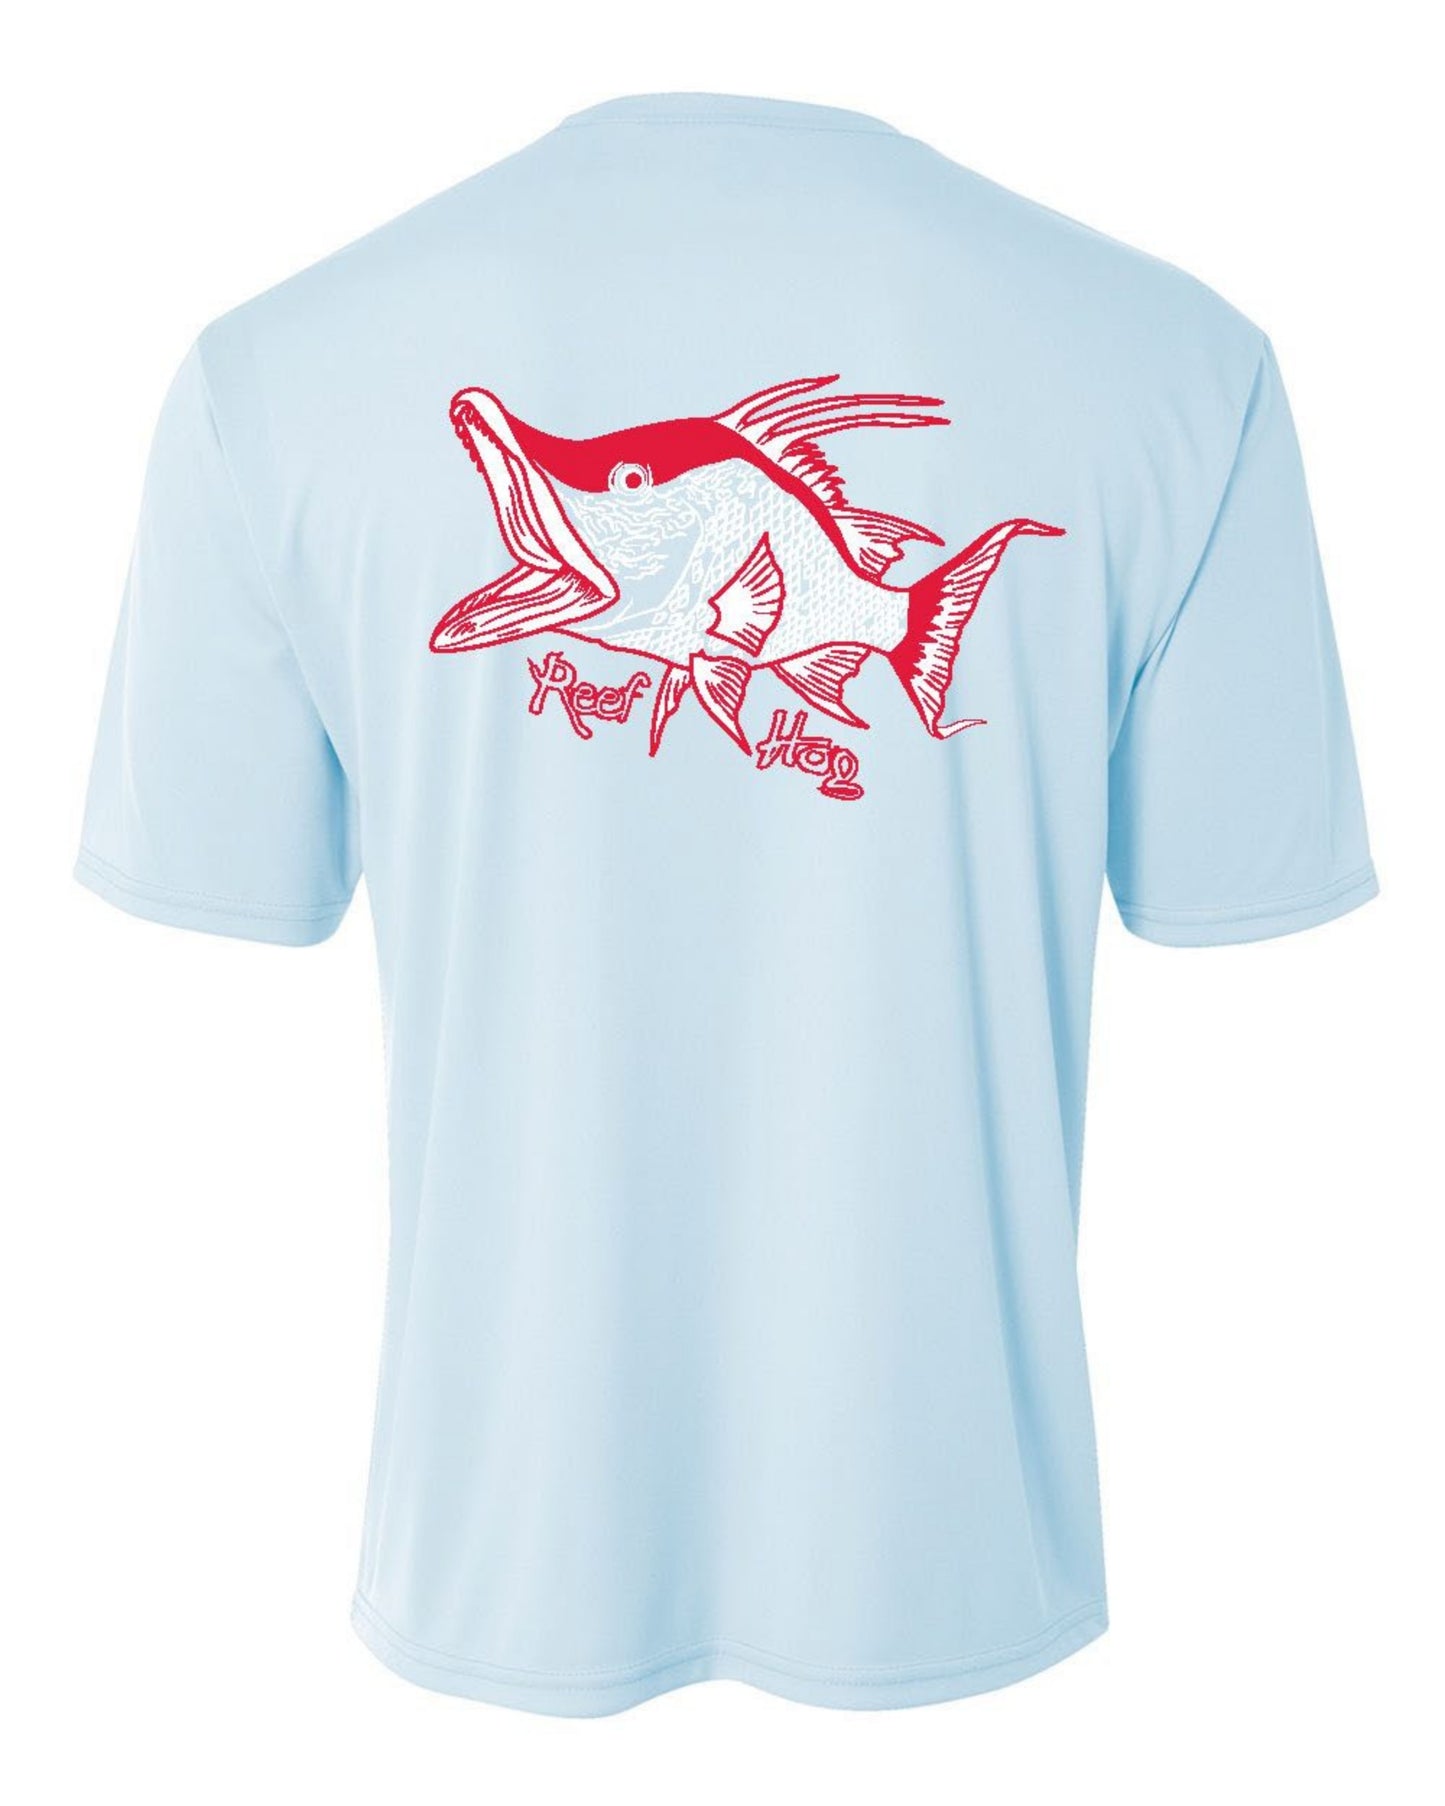 Light Blue Youth New Hogfish "Reef Hog" Short Sleeve Performance Dry-Fit Shirts with Sun Protection by Reel Fishy Apparel